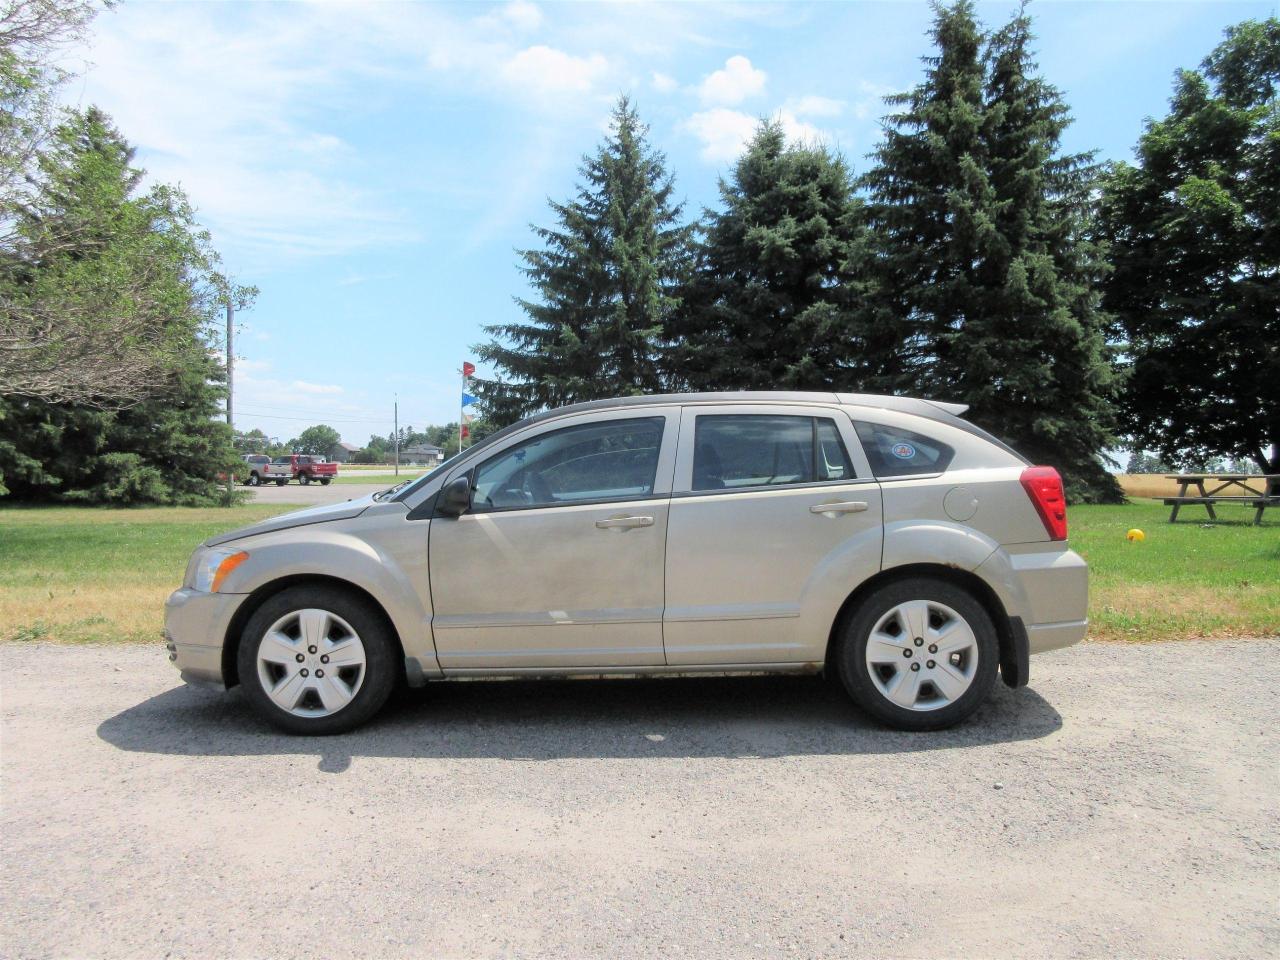 dodge sxt meaning Used 2009 Dodge Caliber SXT for Sale in Thornton, Ontario